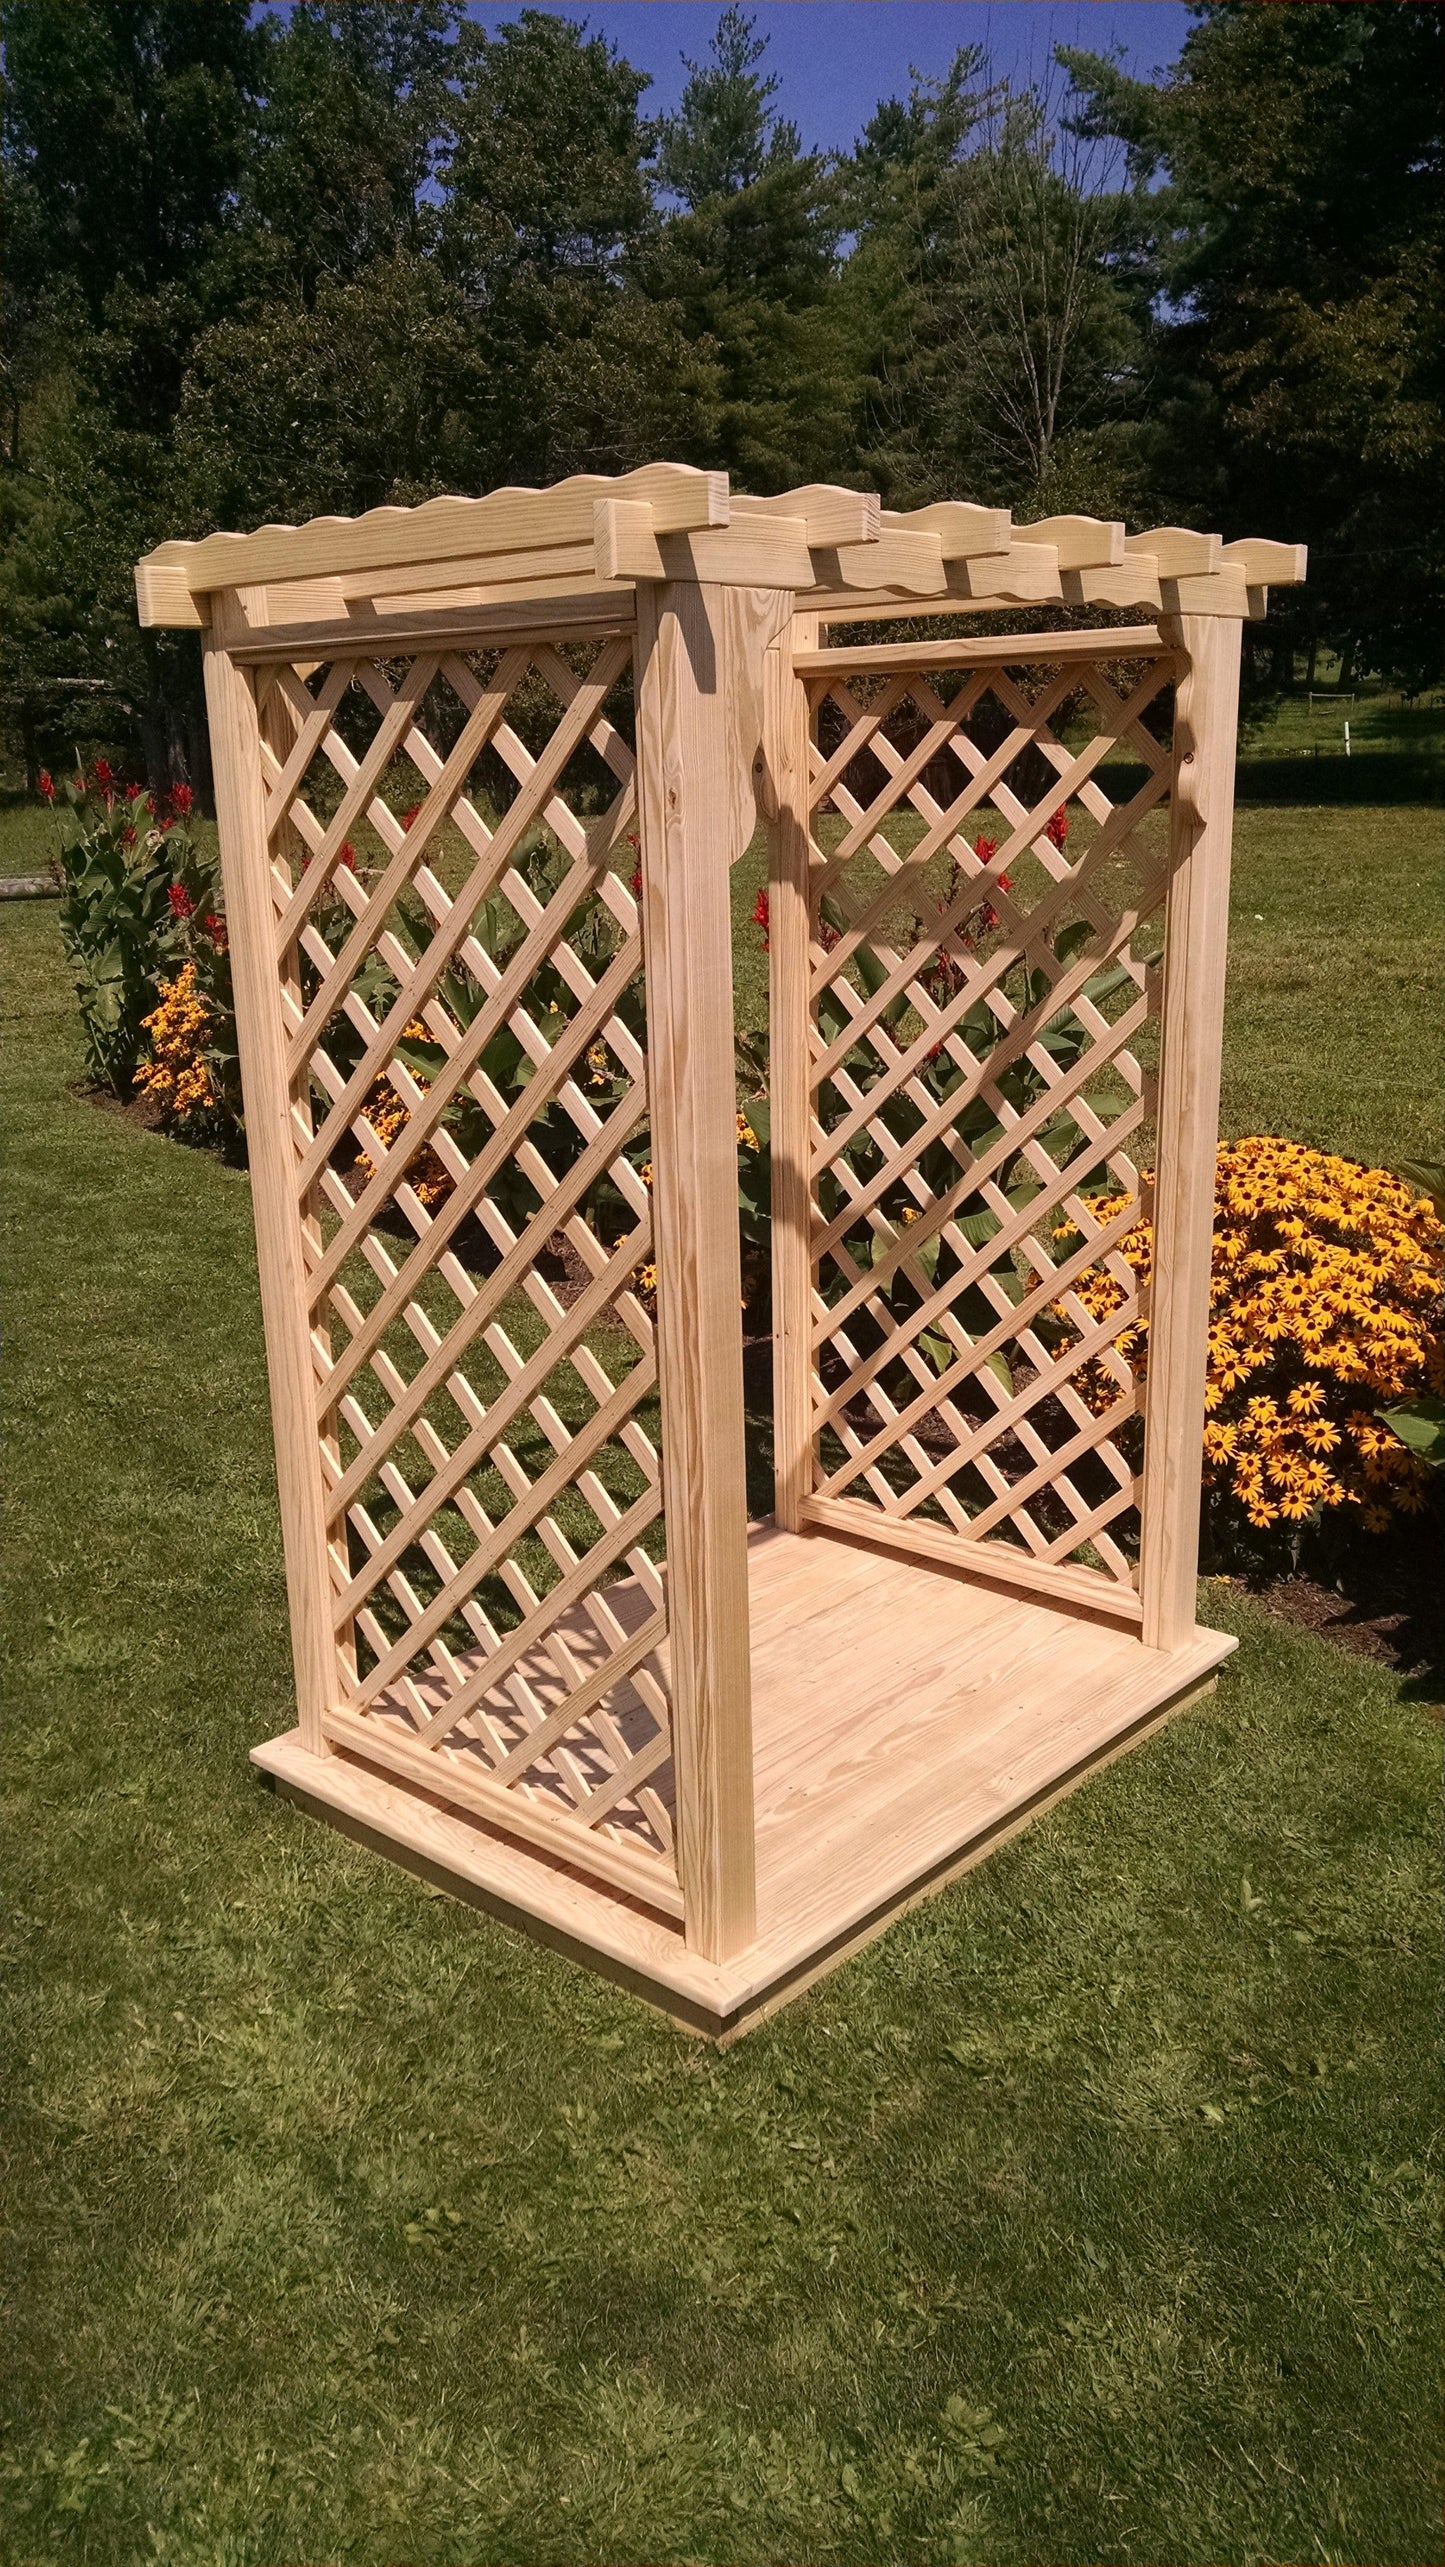 A&L FURNITURE CO. 5' Covington Pressure Treated Pine Arbor & Deck - LEAD TIME TO SHIP 10 BUSINESS DAYS